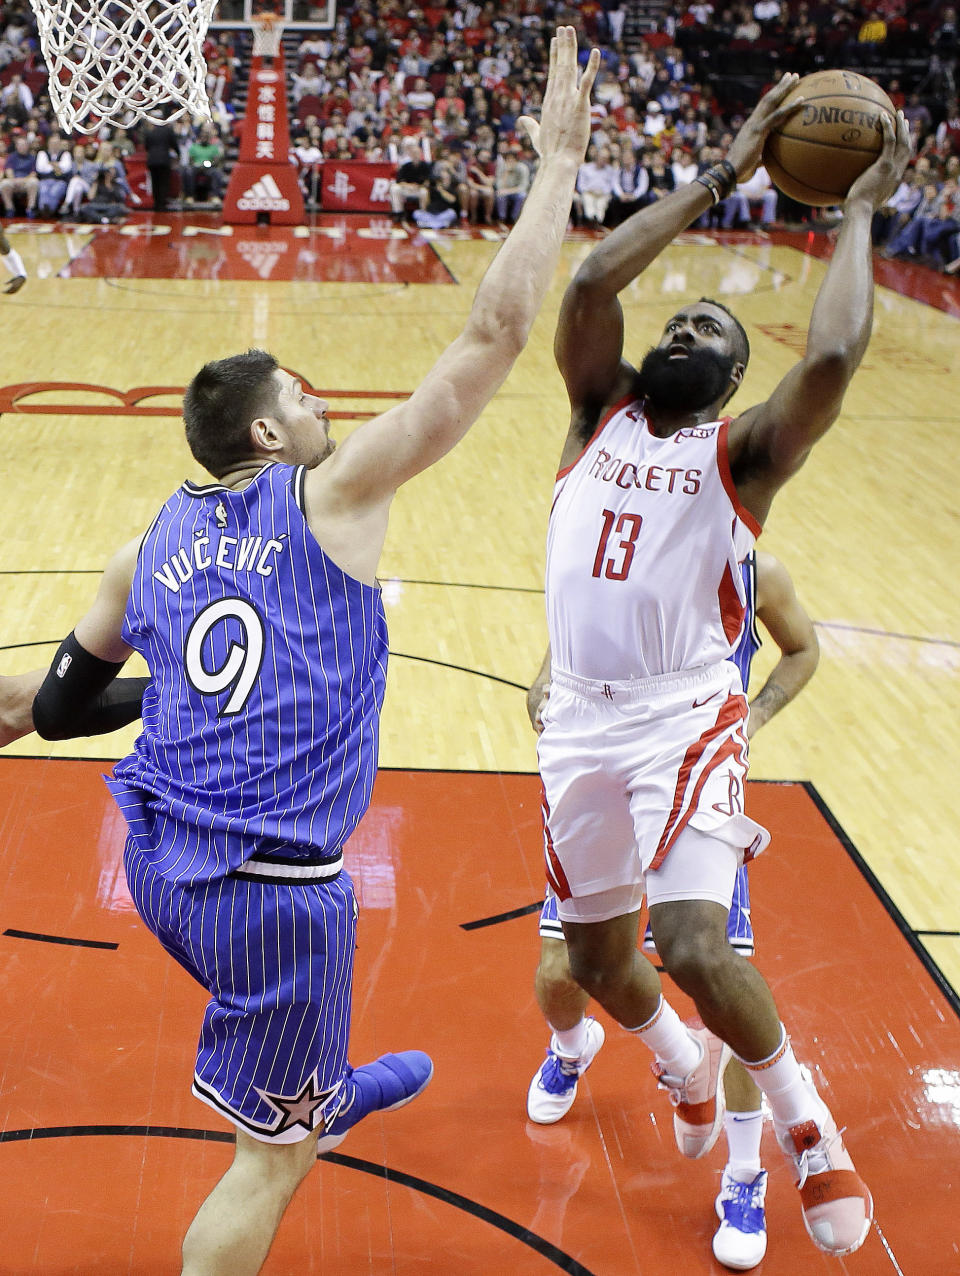 Houston Rockets guard James Harden, right, drives to the basket as Orlando Magic center Nikola Vucevic, left, defends during the first half of an NBA basketball game, Sunday, Jan. 27, 2019, in Houston. (AP Photo/Eric Christian Smith)